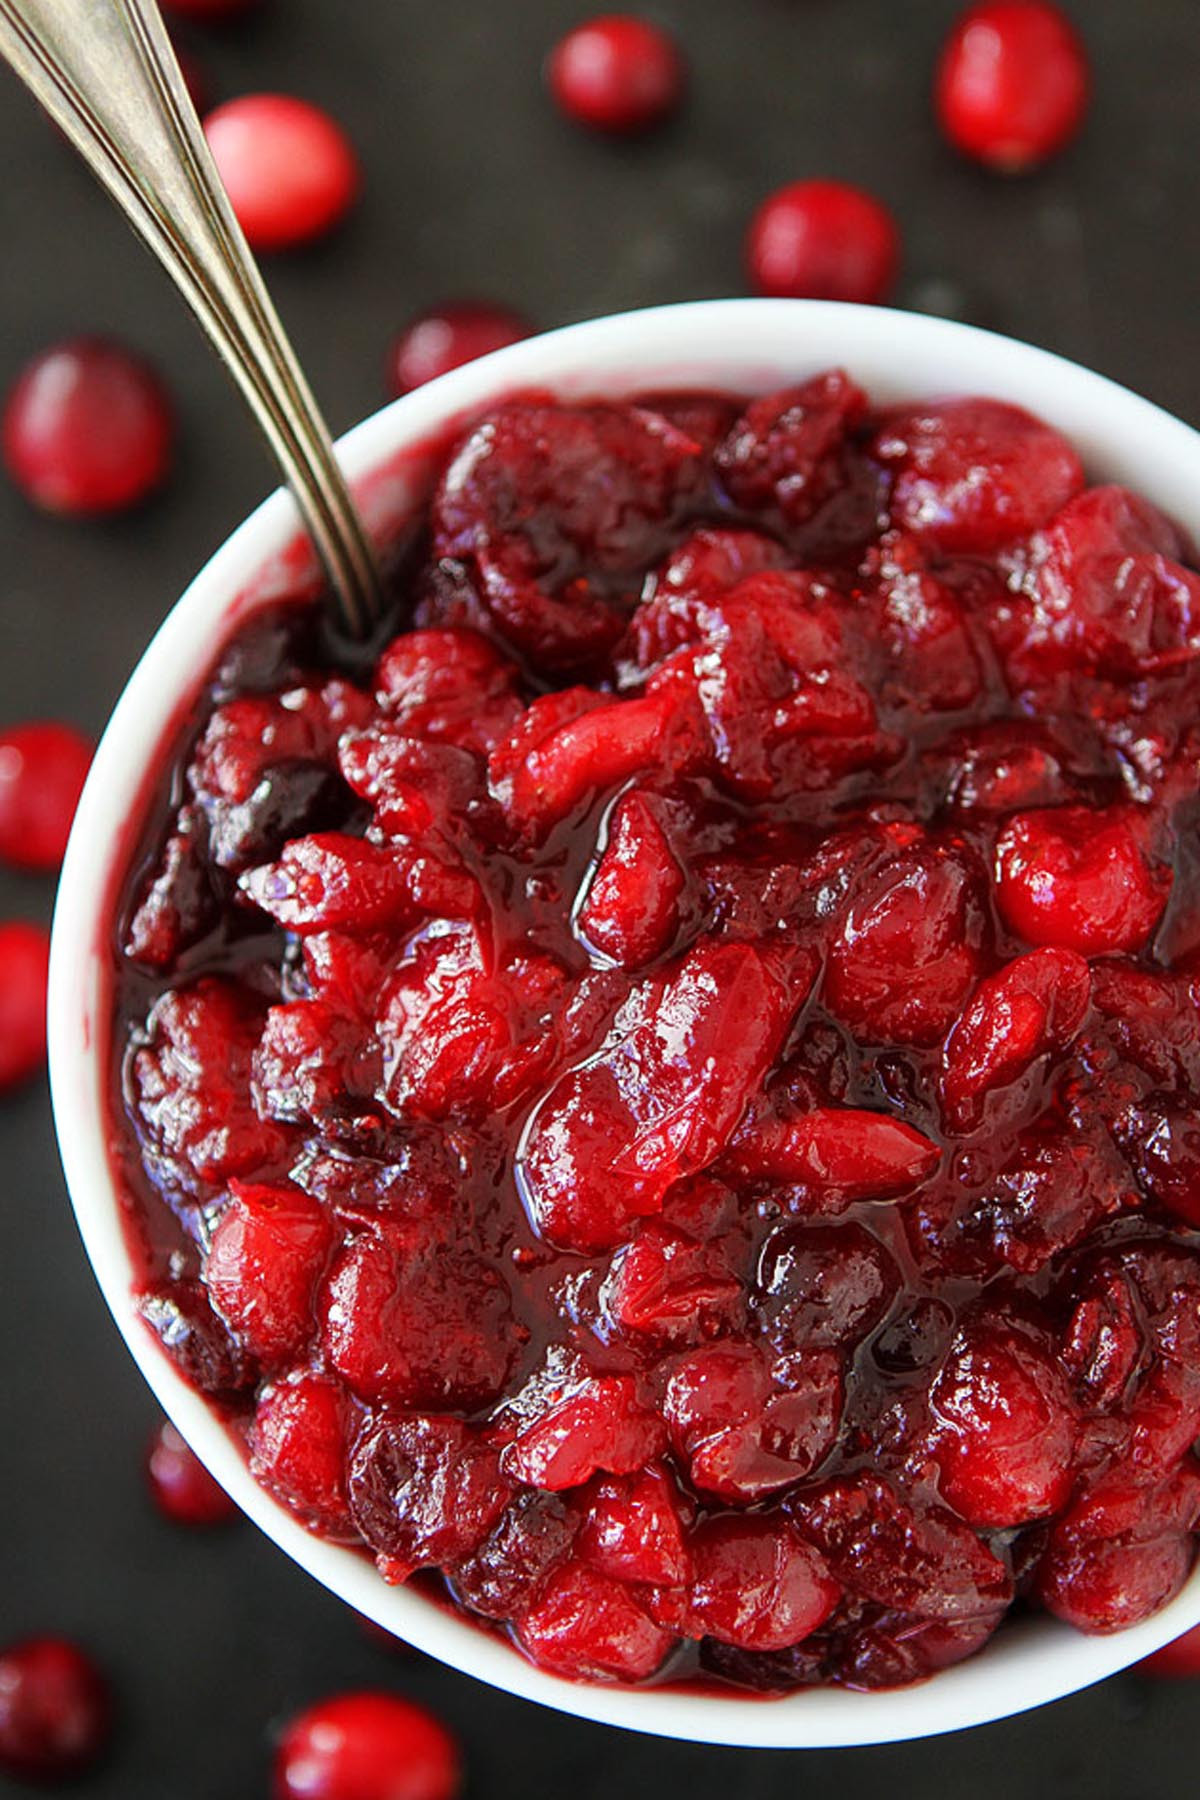 Cranberry Sauce Recipes For Thanksgiving
 13 Easy Cranberry Sauce Recipes for Thanksgiving How to